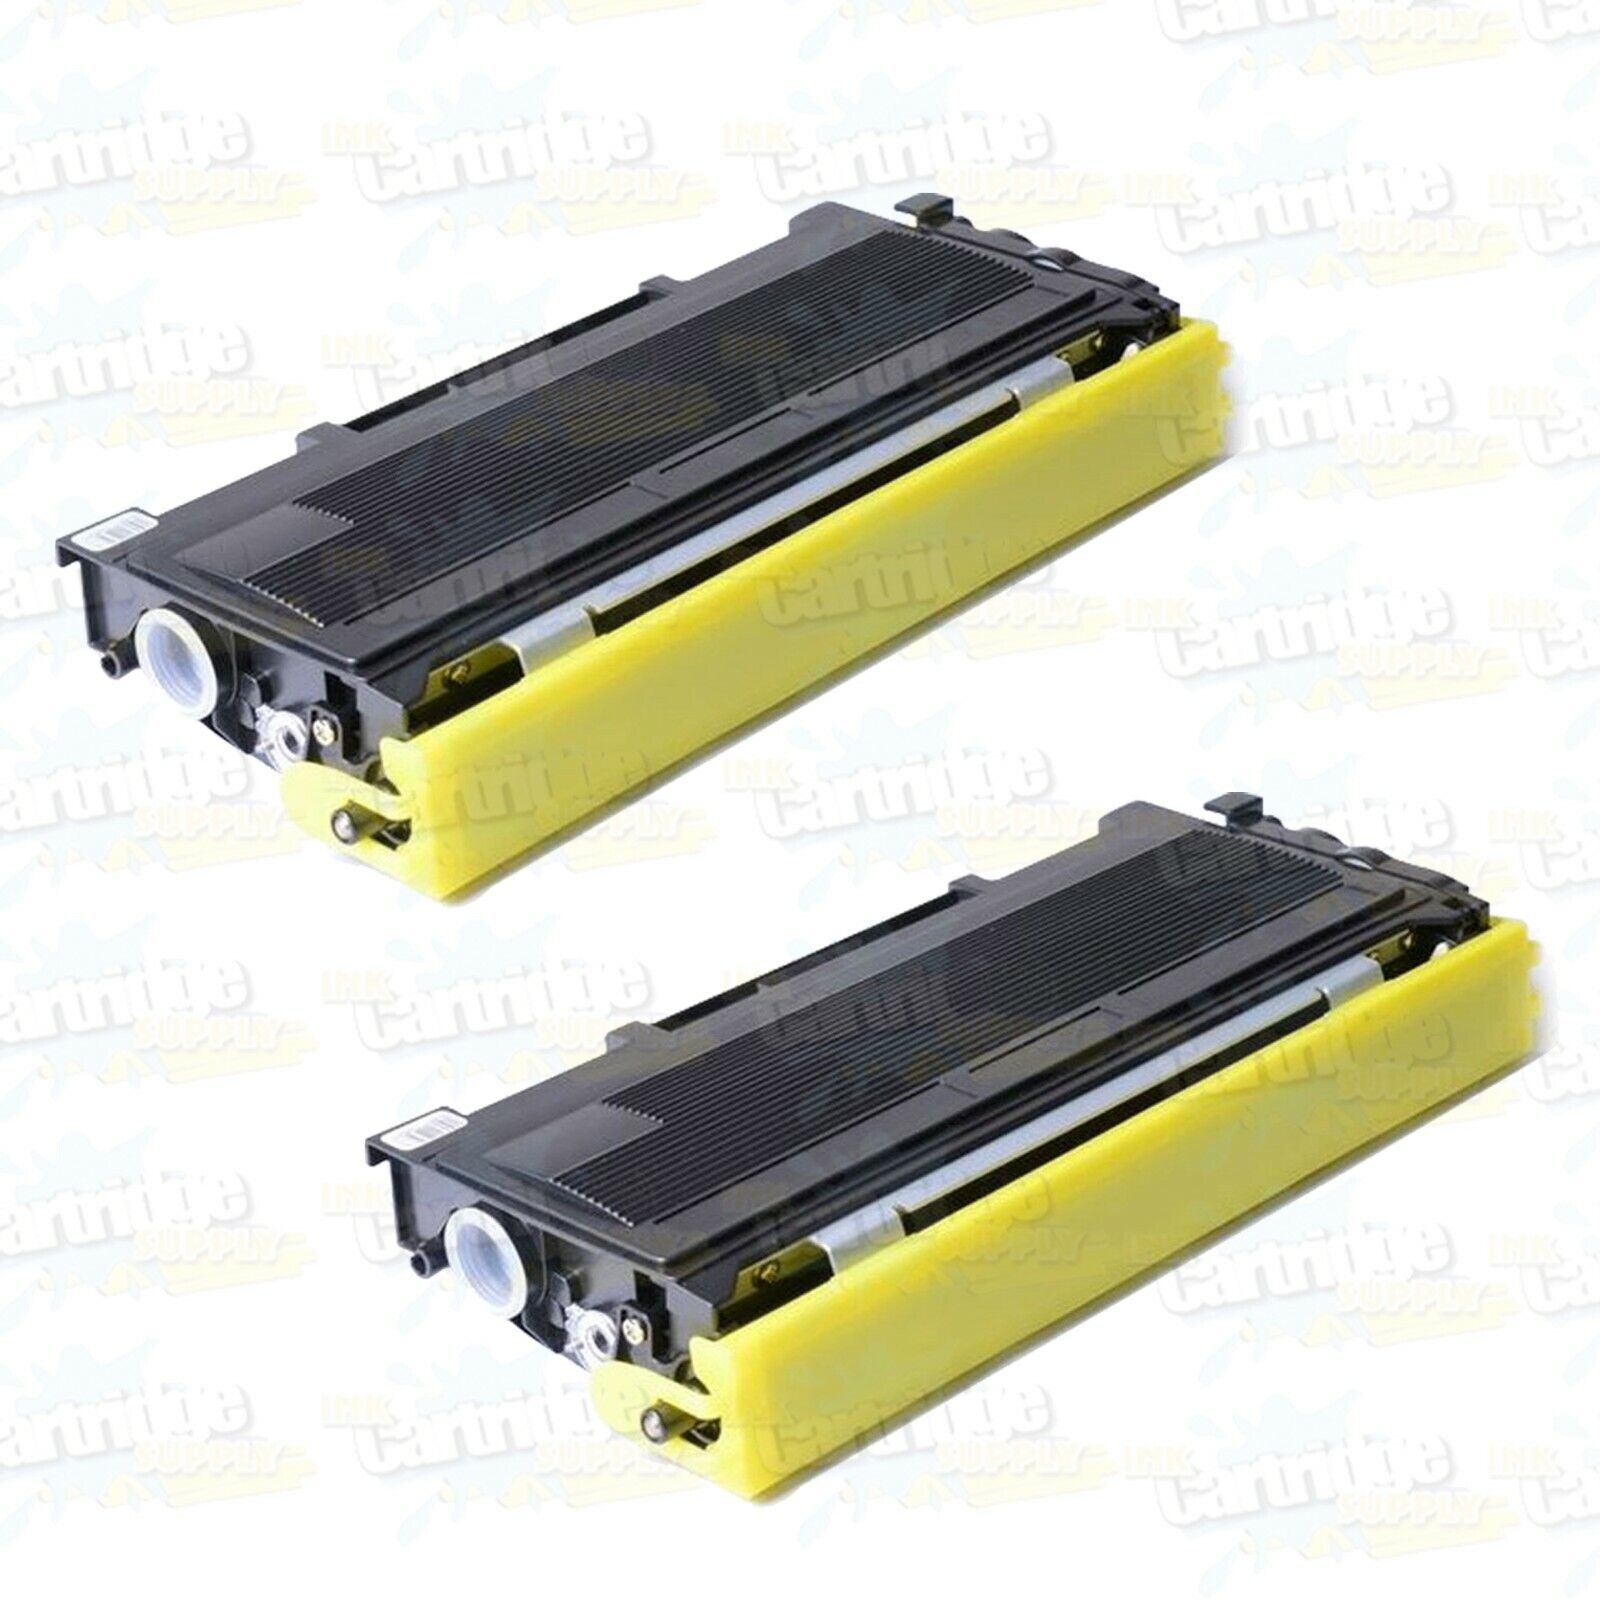 2PK TN350 Toner Cartridge For Brother DCP-7010 DCP-7020 DCP-7025 MFC-7220 Printe